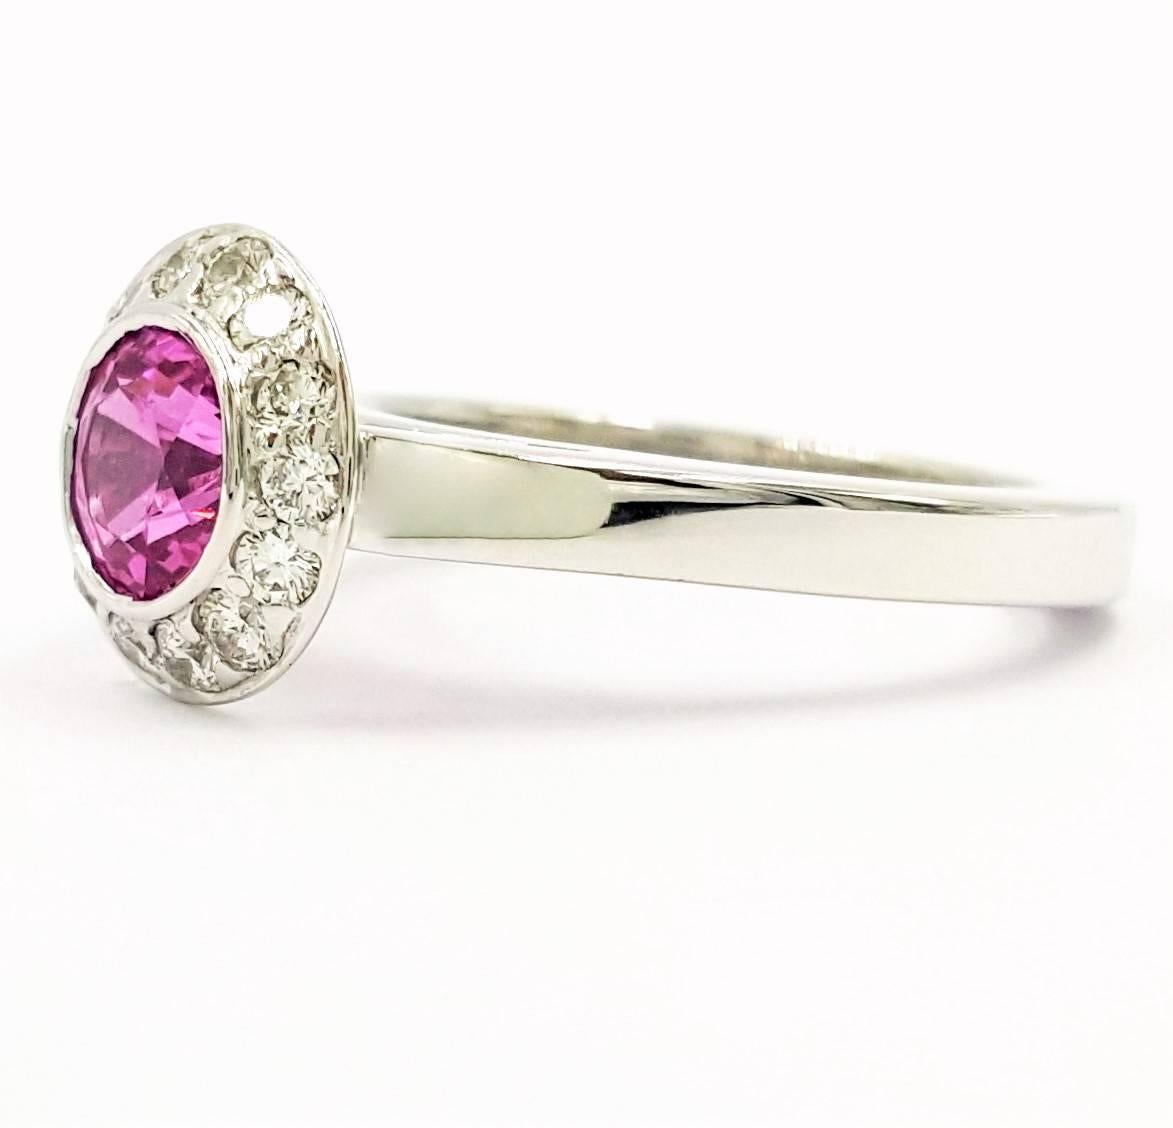 1.25 Carat Vivid Pink Sapphire Diamond Gold New Beginnings Ring In New Condition For Sale In Scottsdale, AZ